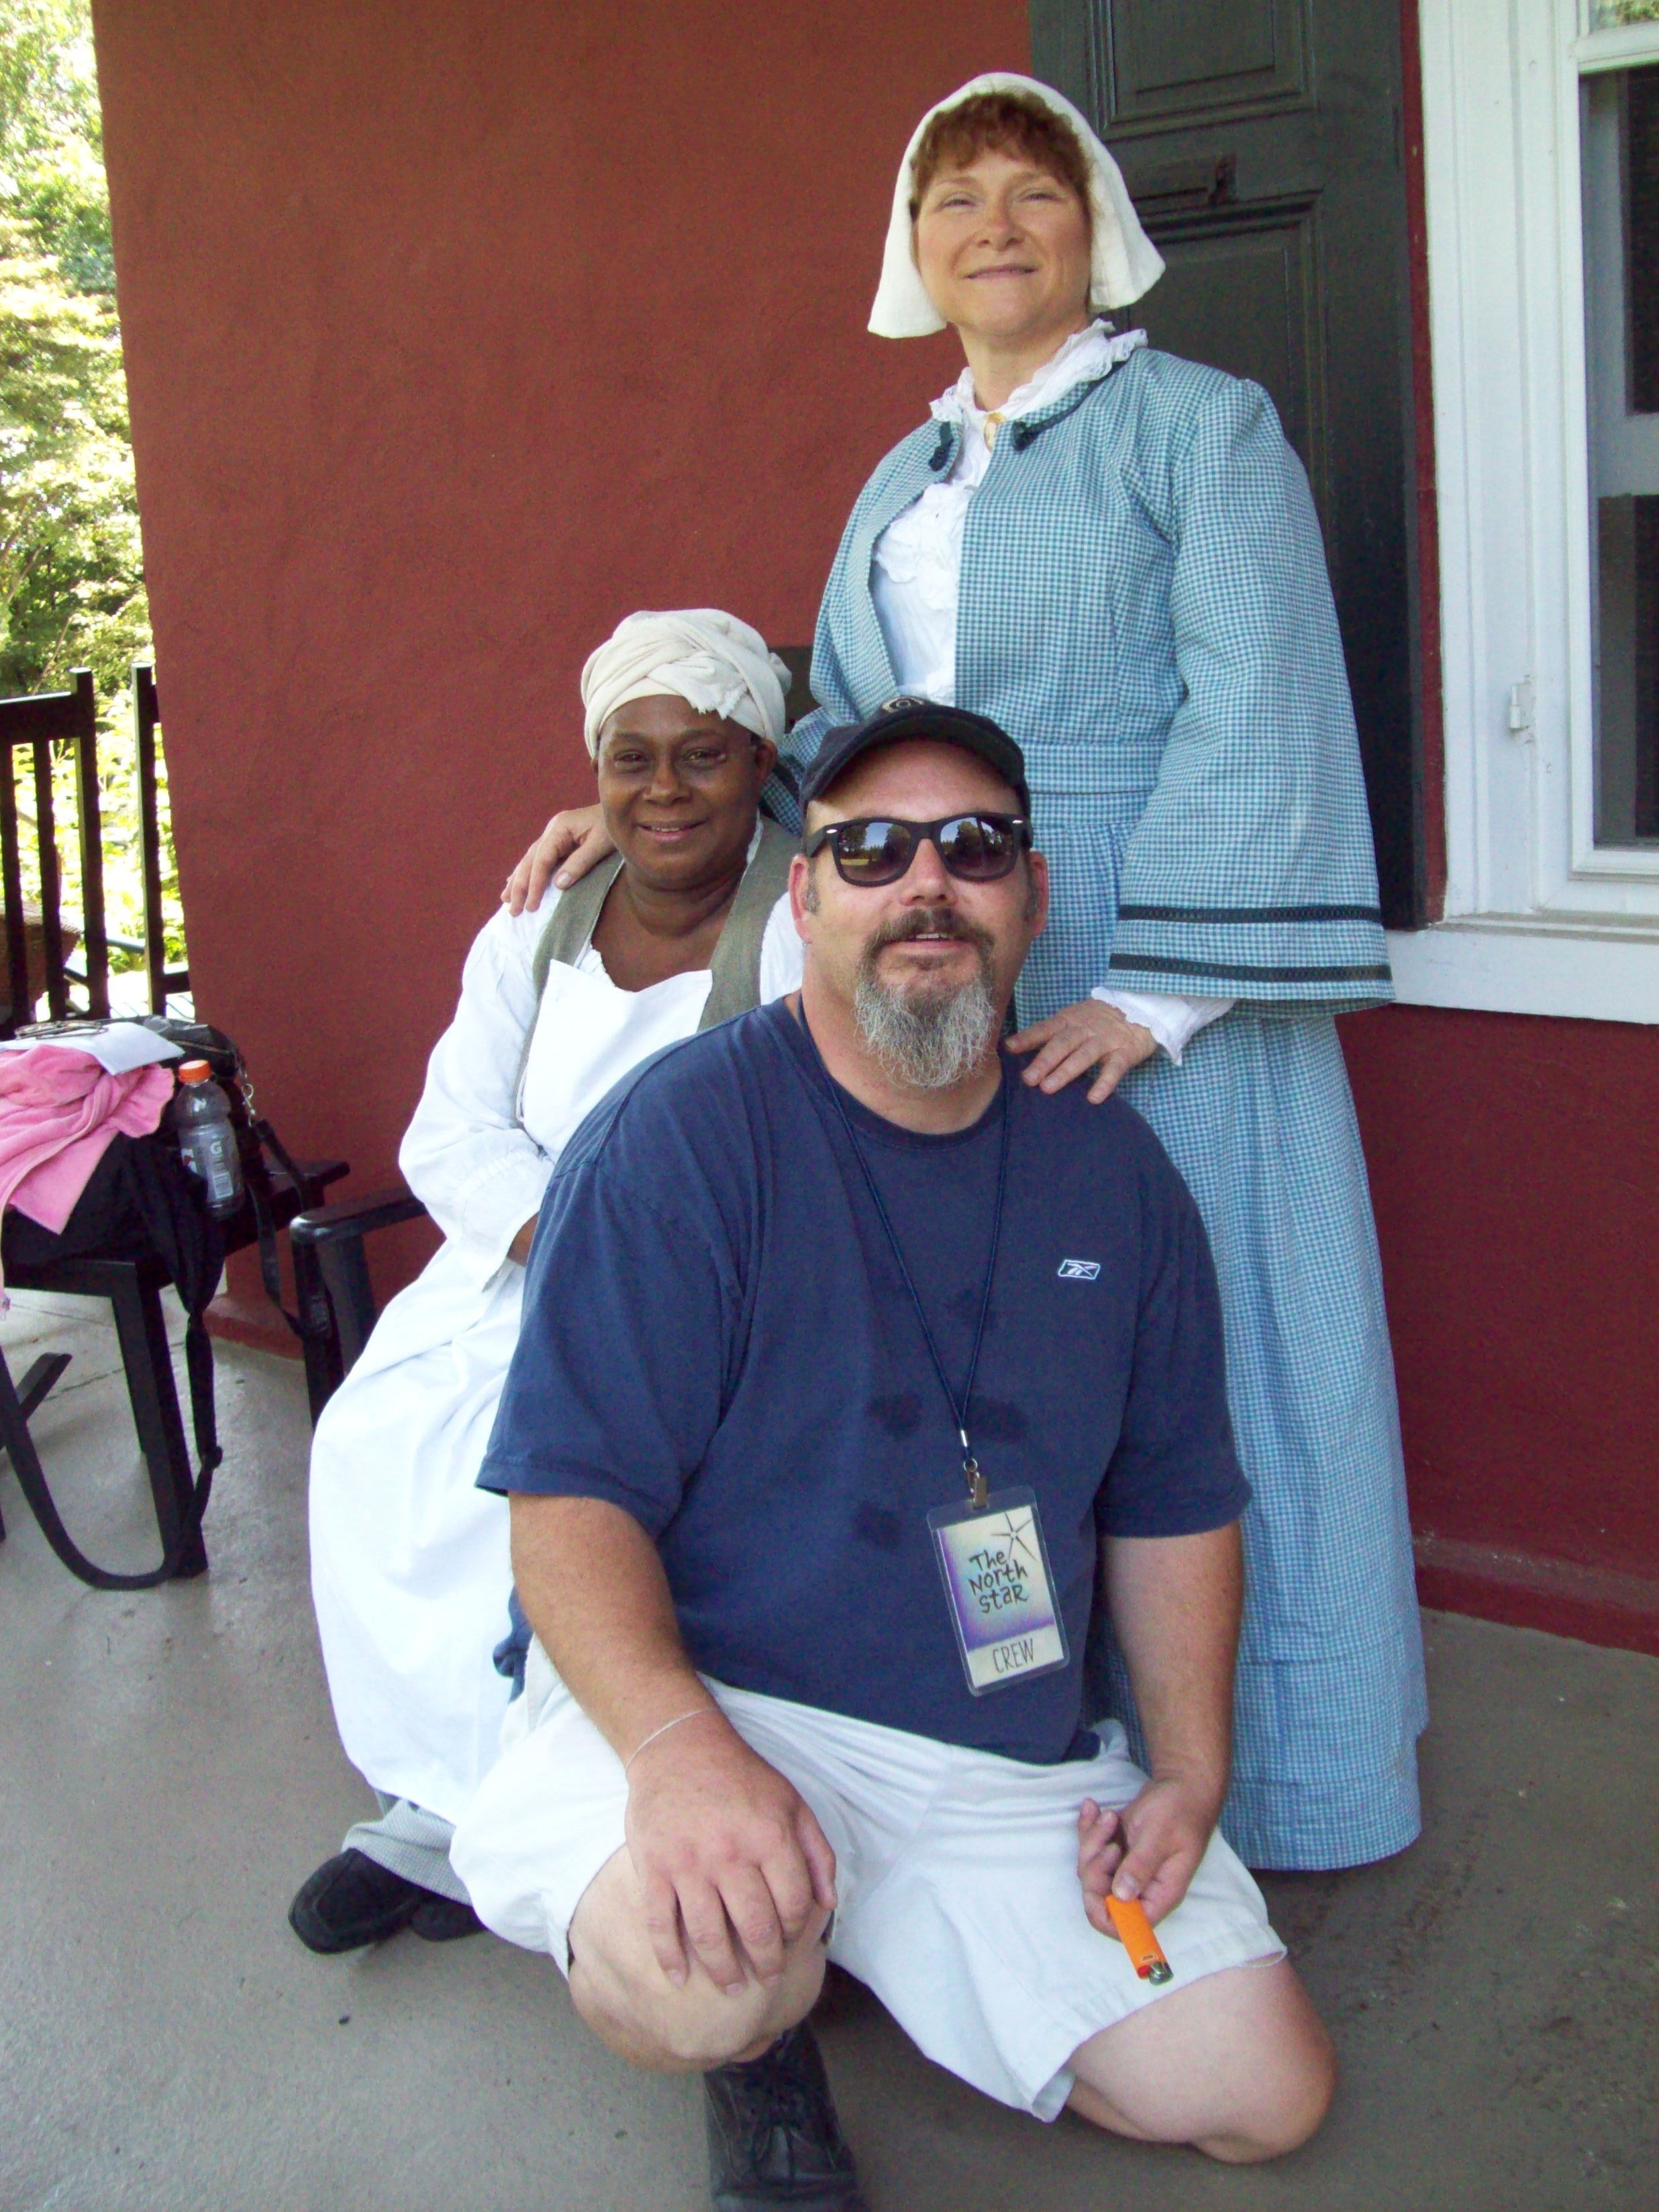 With Diane Johnson (Pearl) and April Woodall (Mrs. Atkins) at Highland Farm in Doylestown, Pa. The North Star.